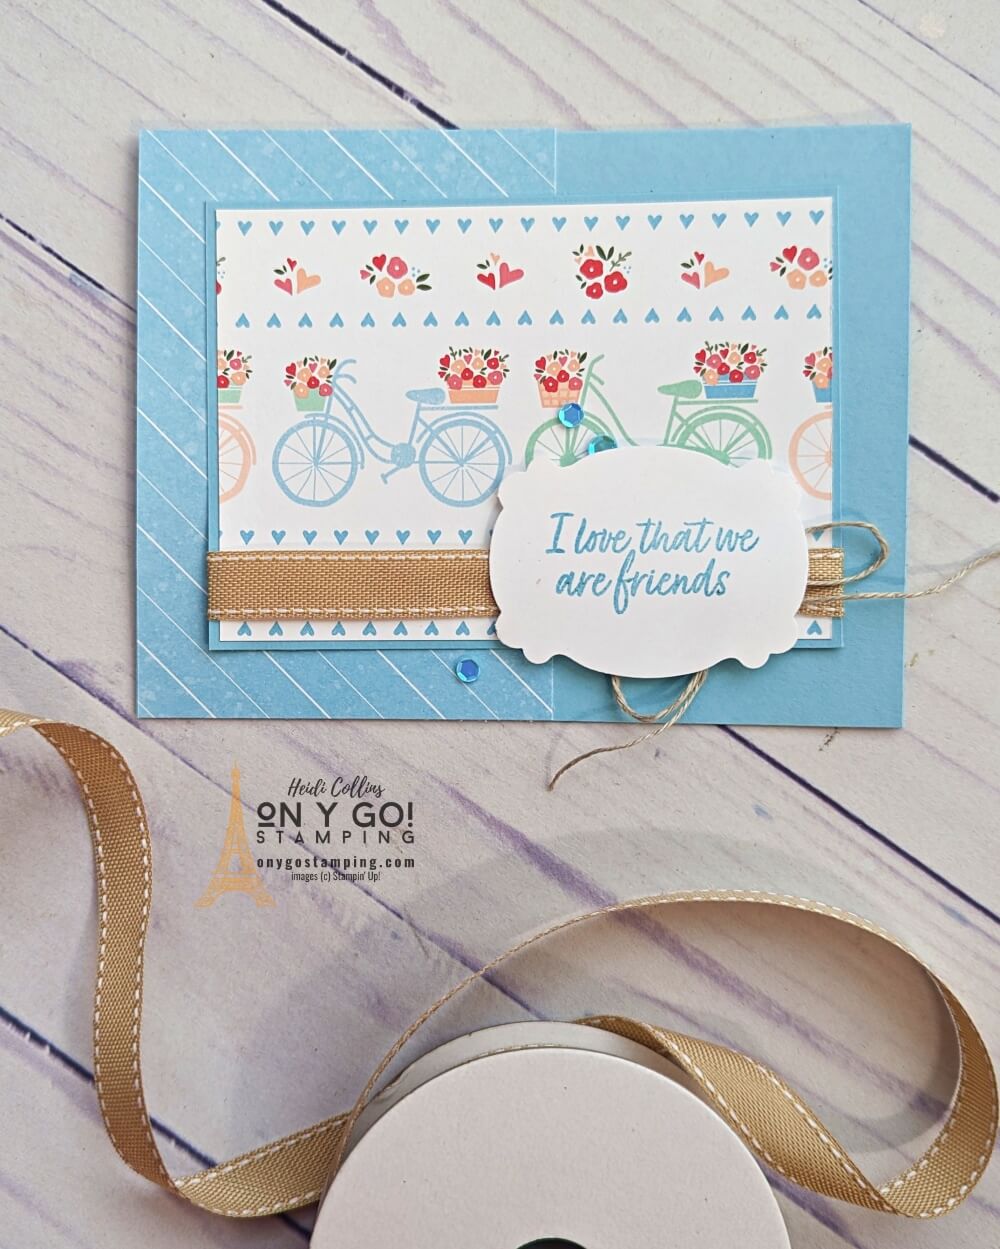 This Valentine's Day, show your friend how much they mean to you with a handmade card using the Country Bouquet stamp set and punch from Stampin' Up! Pairing your design with some festive patterned paper, you can craft a card with a cute bicycle motif that your friend will love.